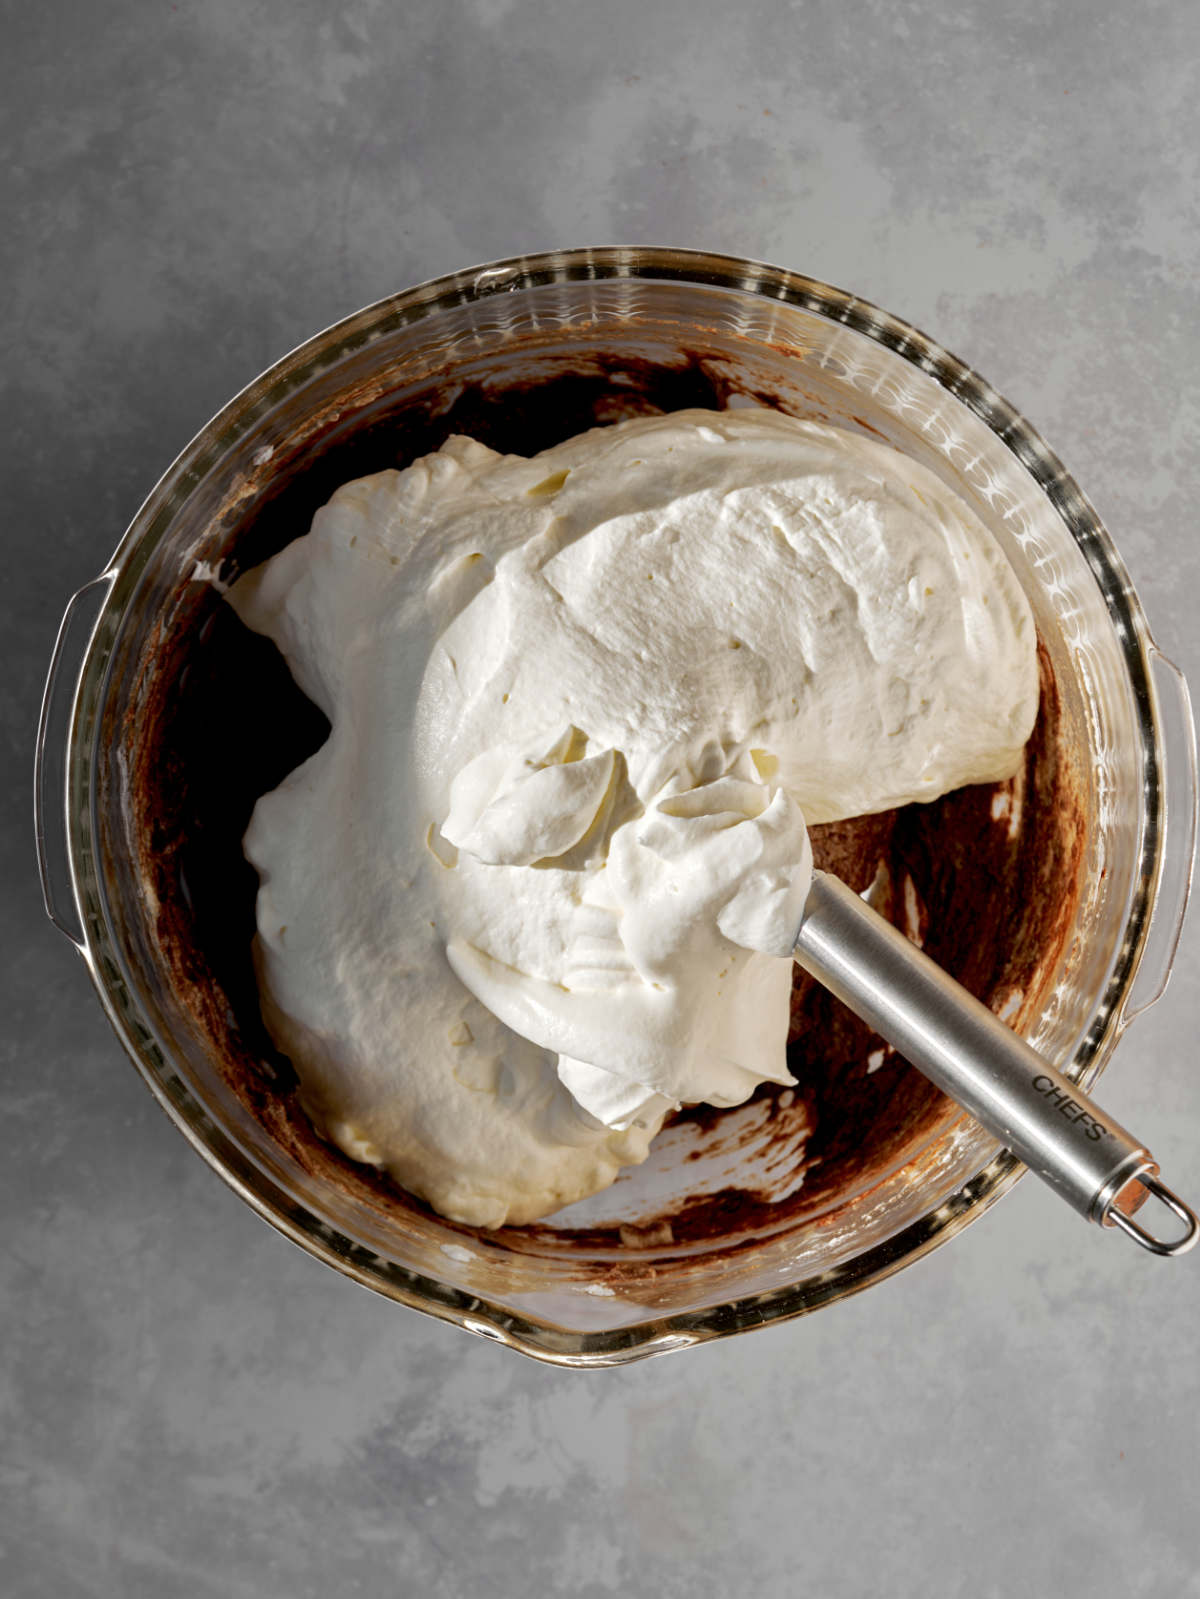 Whipped cream on top of chocolate in a large glass bowl with a metal handle coming out of it.